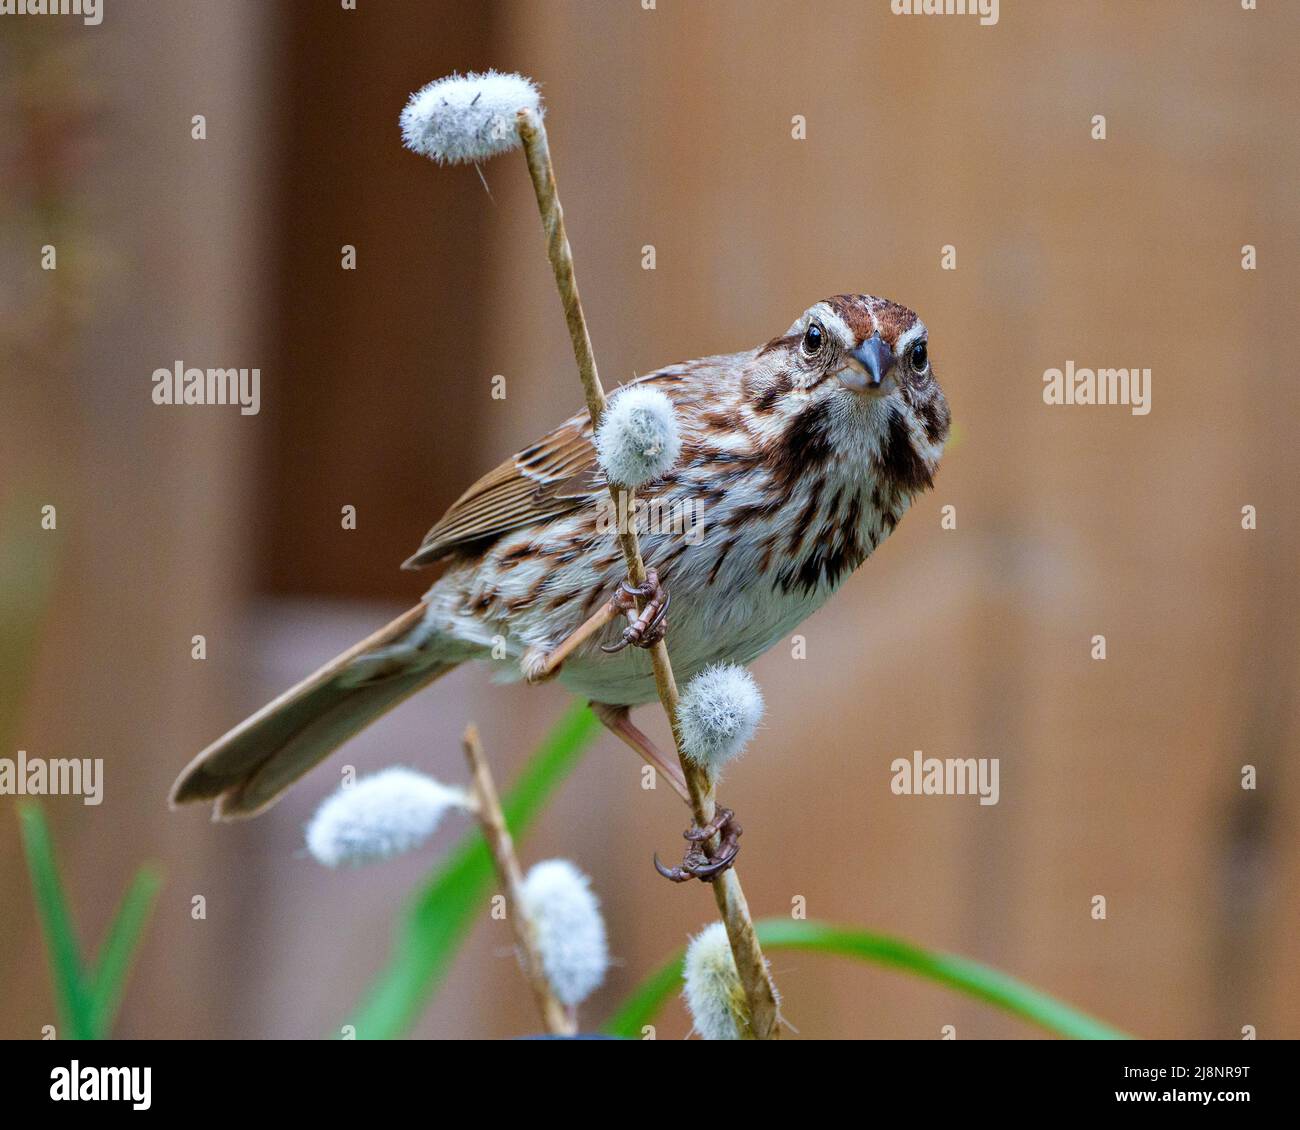 Song Sparrow perched on a twig with brown blur background in its environment and habitat surrounding, displaying brown feather plumage. Stock Photo